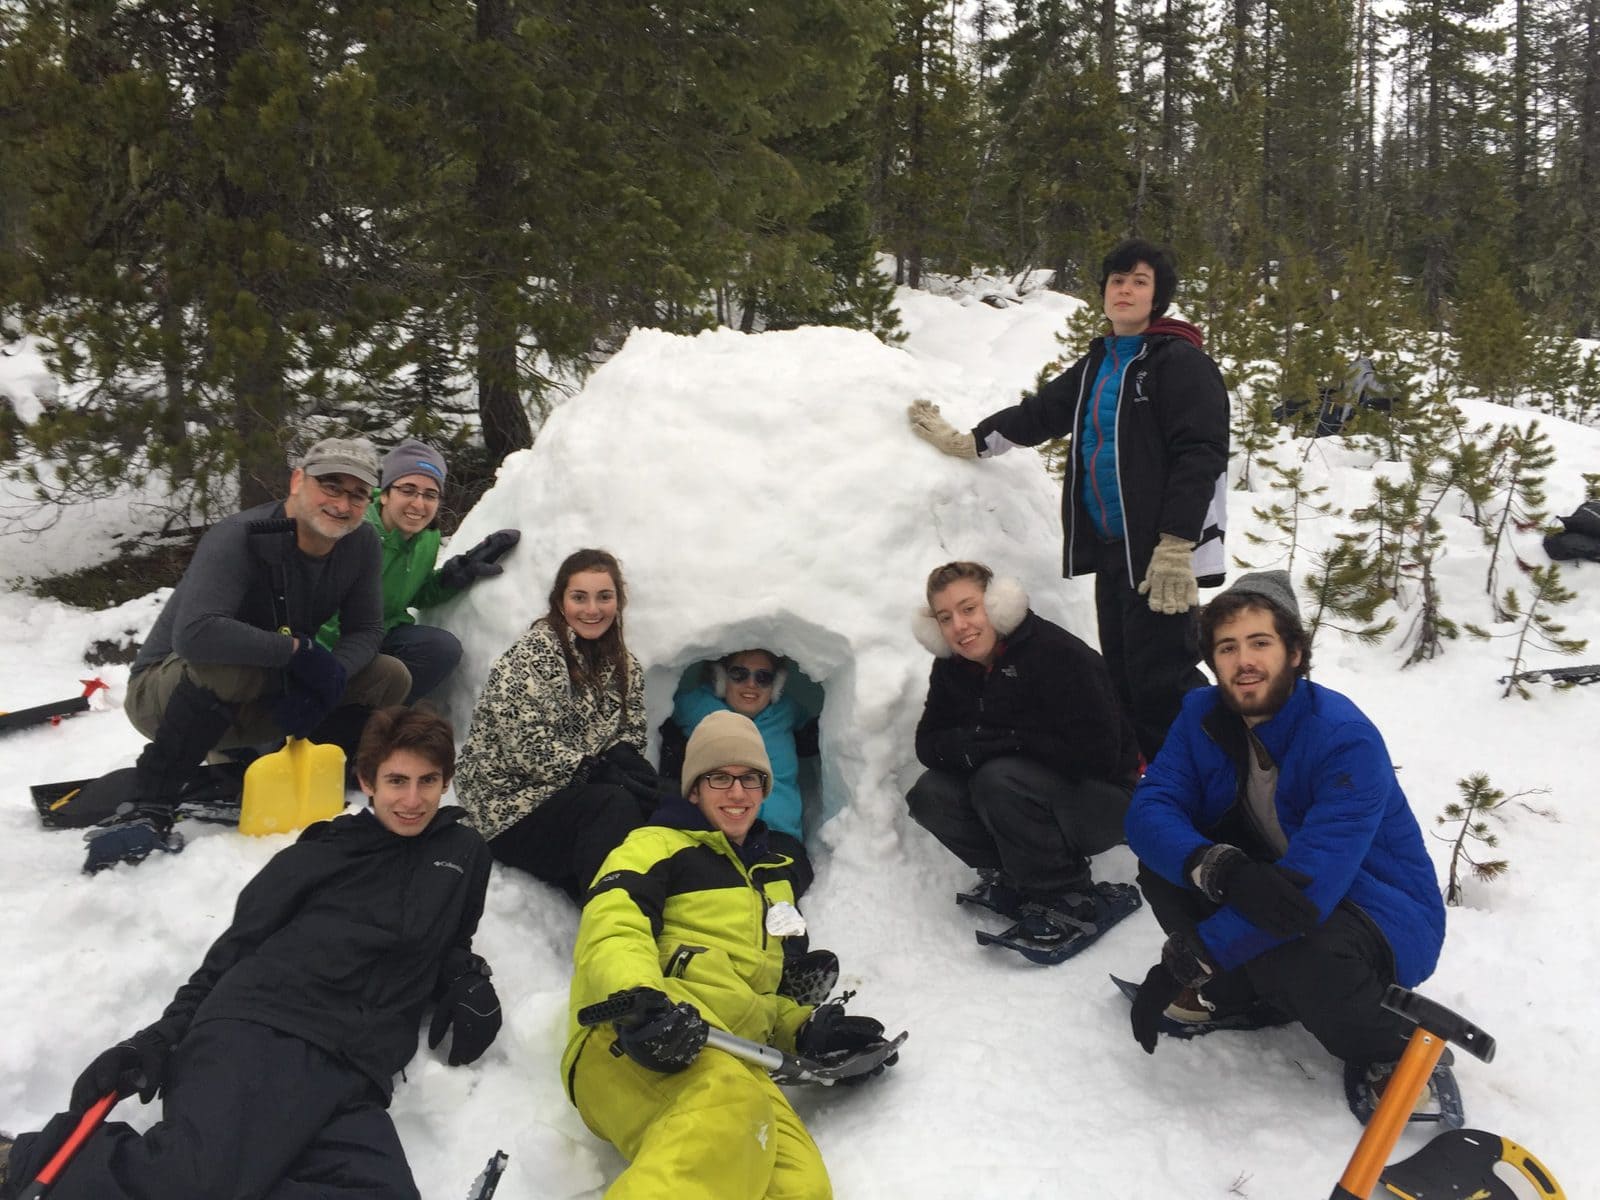 After many hours, the igloo crew had a lot to be proud of. Here's the finished product!